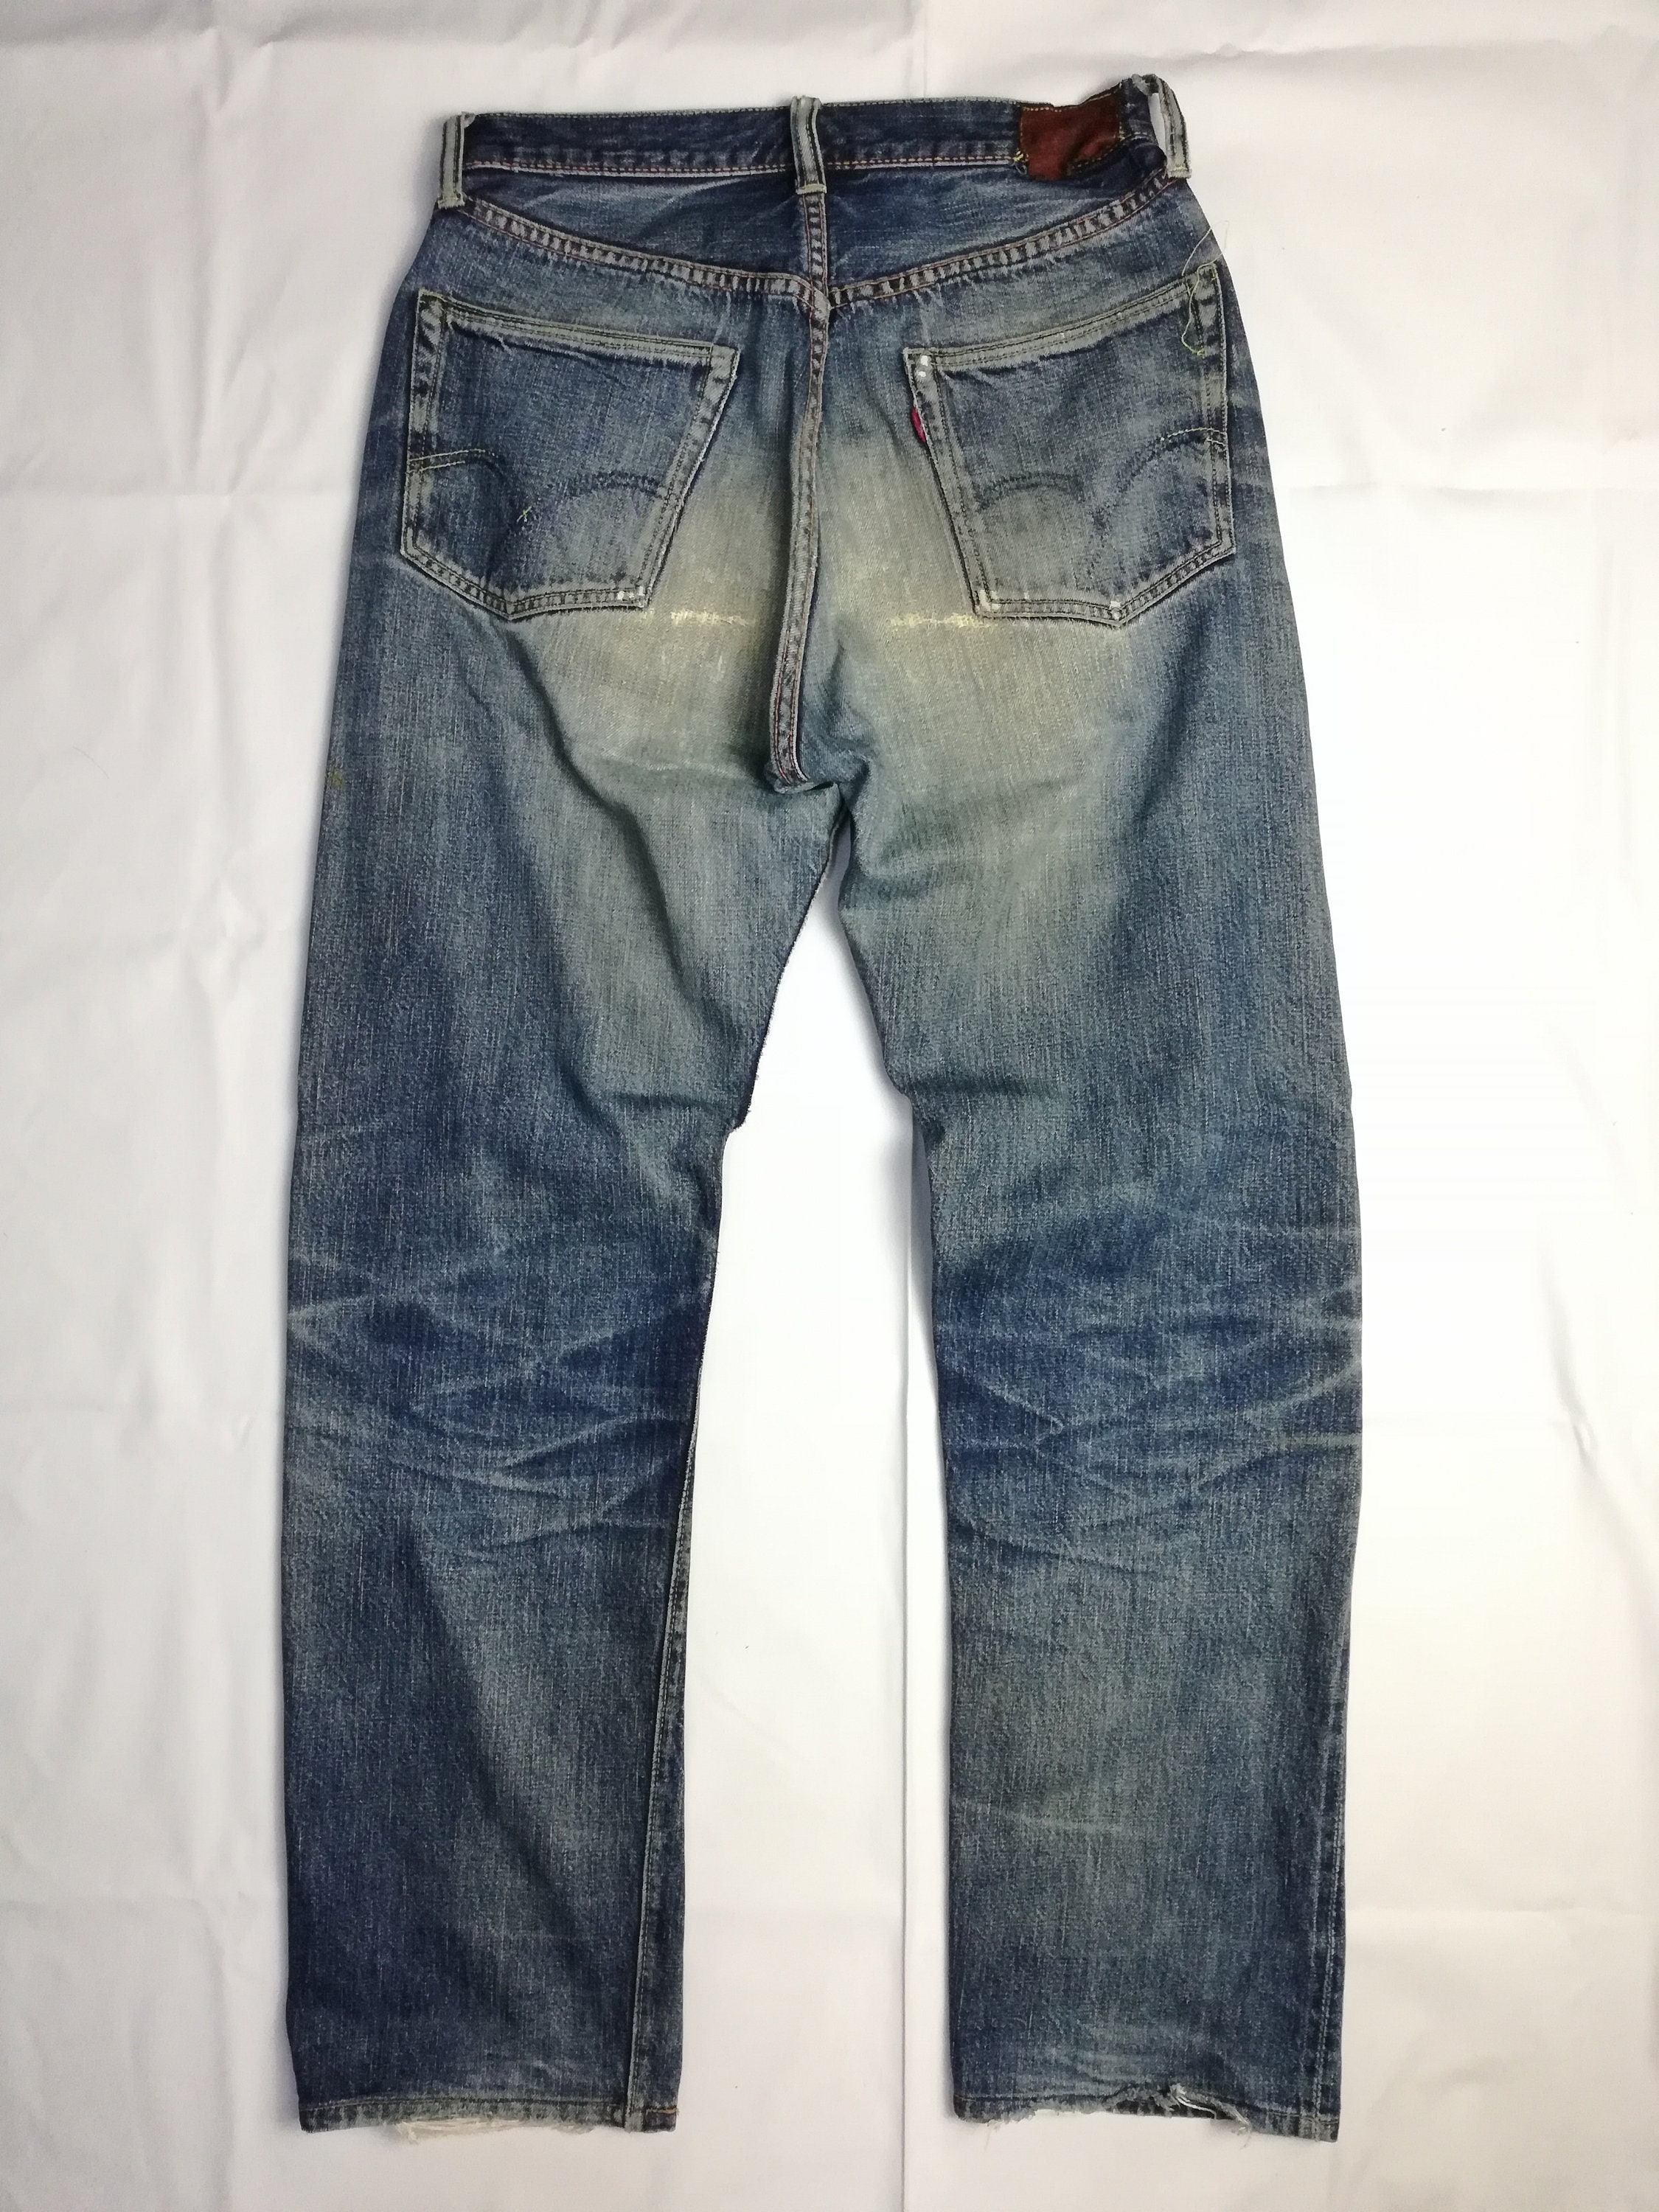 W30 Reworked FULLCOUNT Selvedge Denim With Patchwork - Etsy